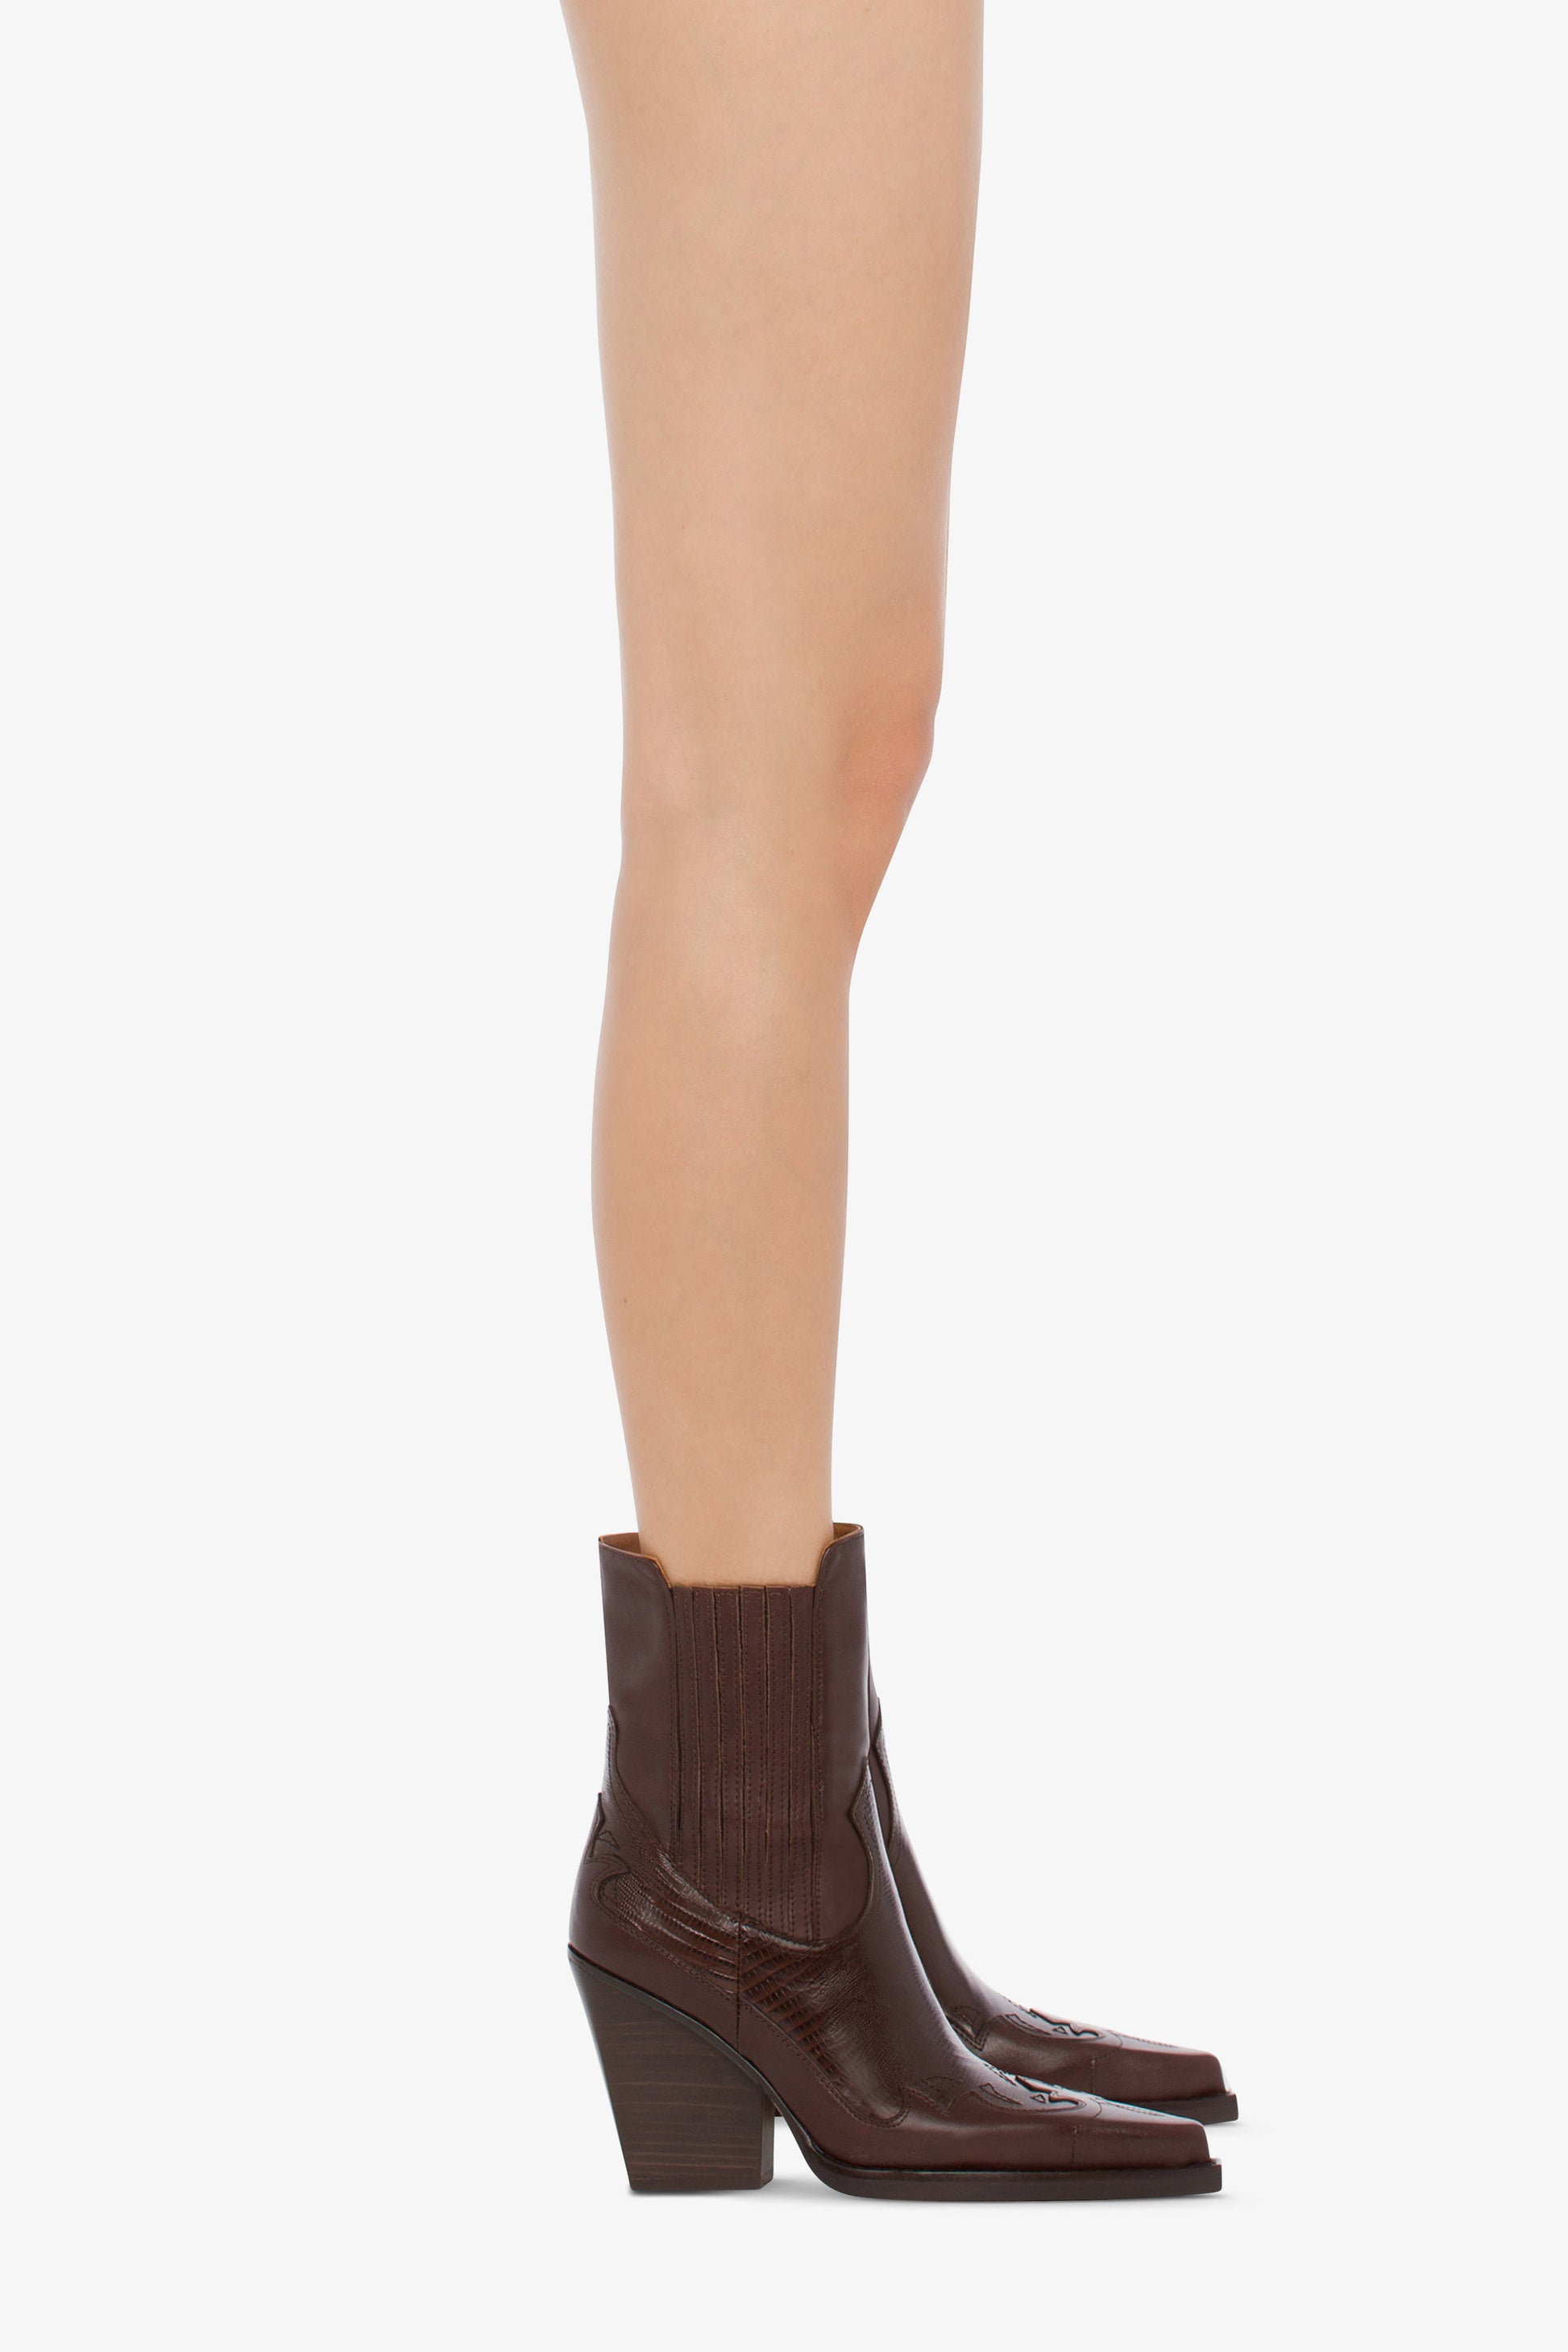 Pointed ankle boots in chocolate and mocha lizard-printed leather - Producto usado